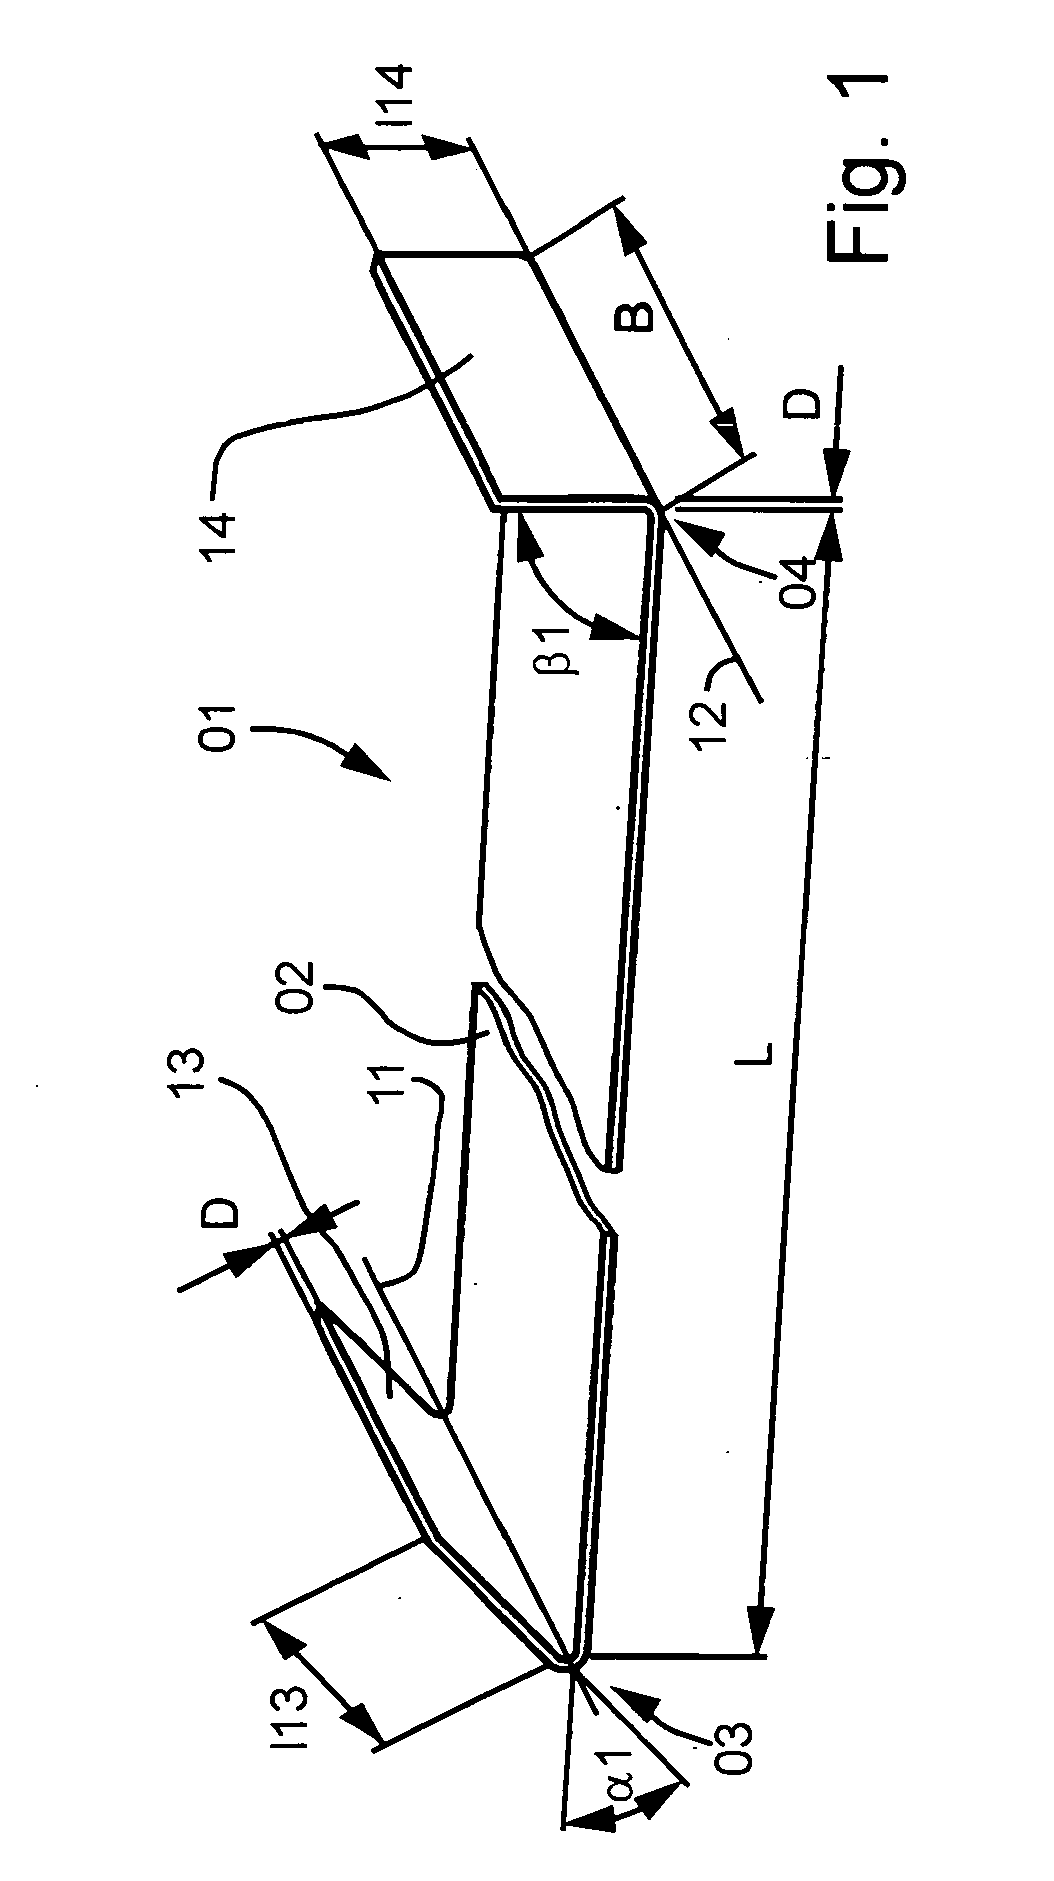 Systems for Checking the Loading of a Print Forme Magazine and Systems for Transporting at Least One Print Forme Stored in a Print Form Magazine to a Cylinder